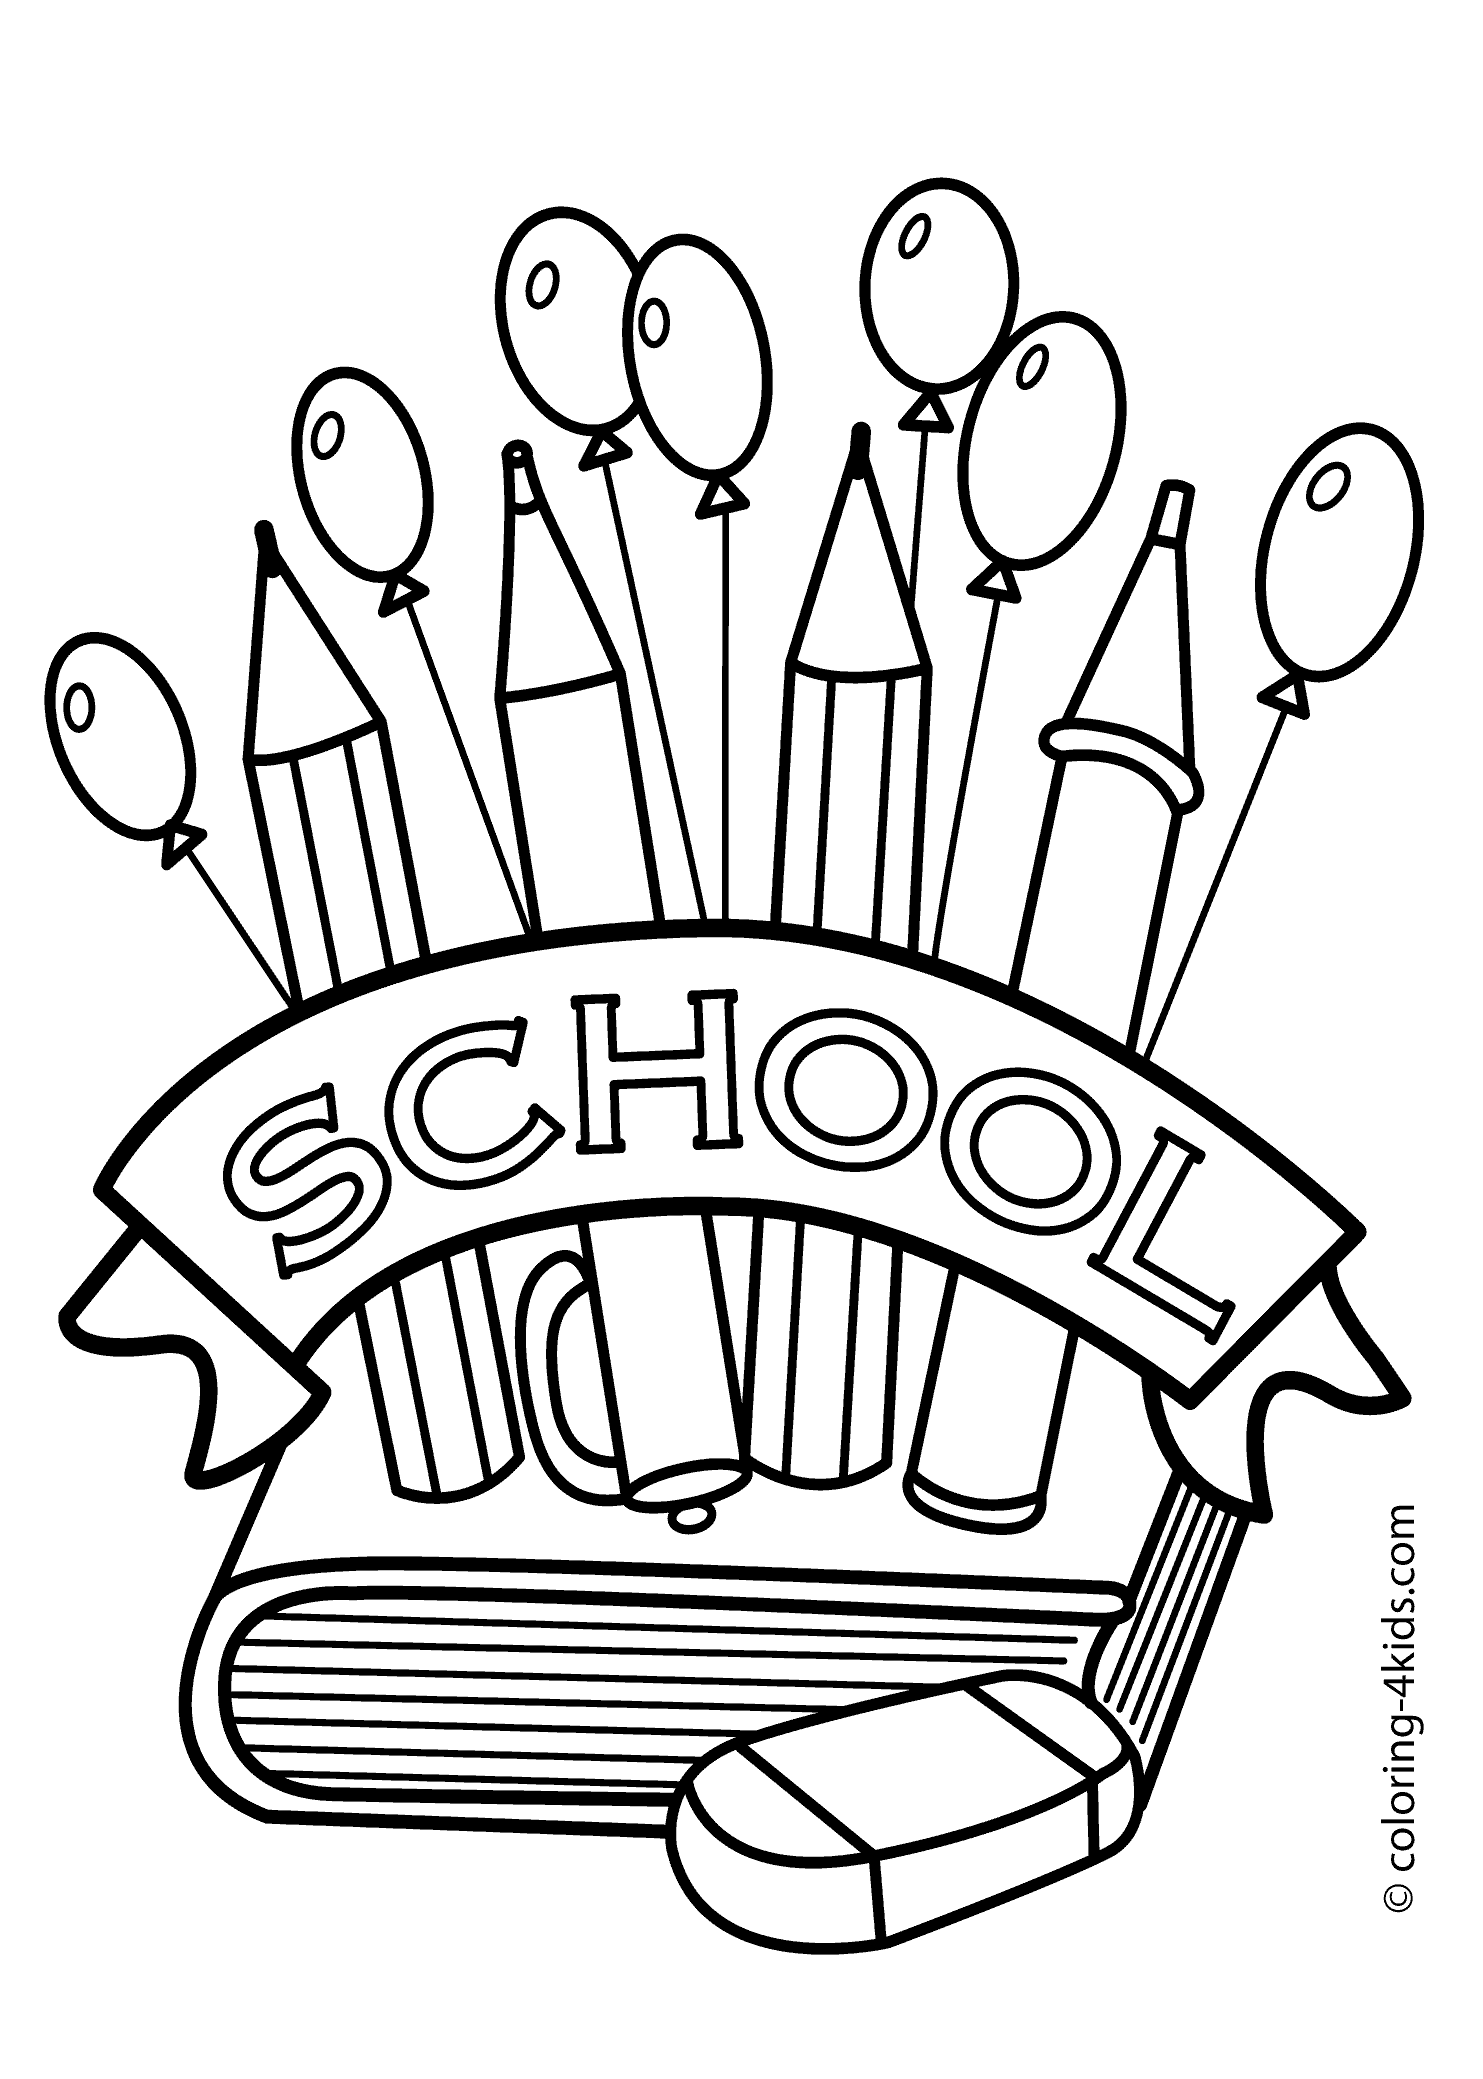 School coloring pages to download and print for free